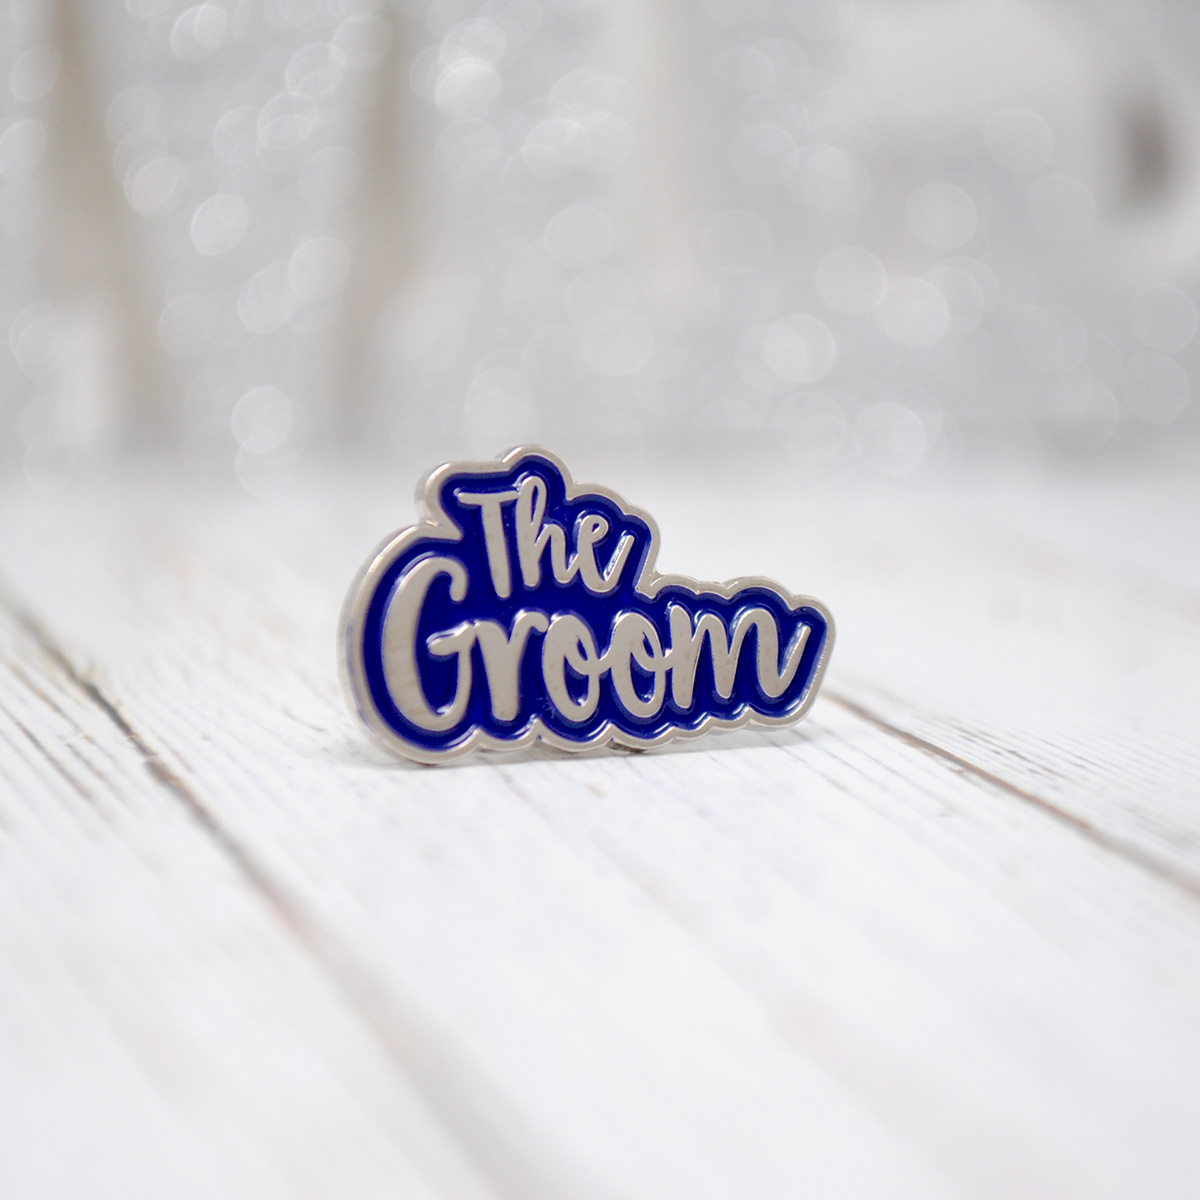 the groom wedding stag party enamel pin badge